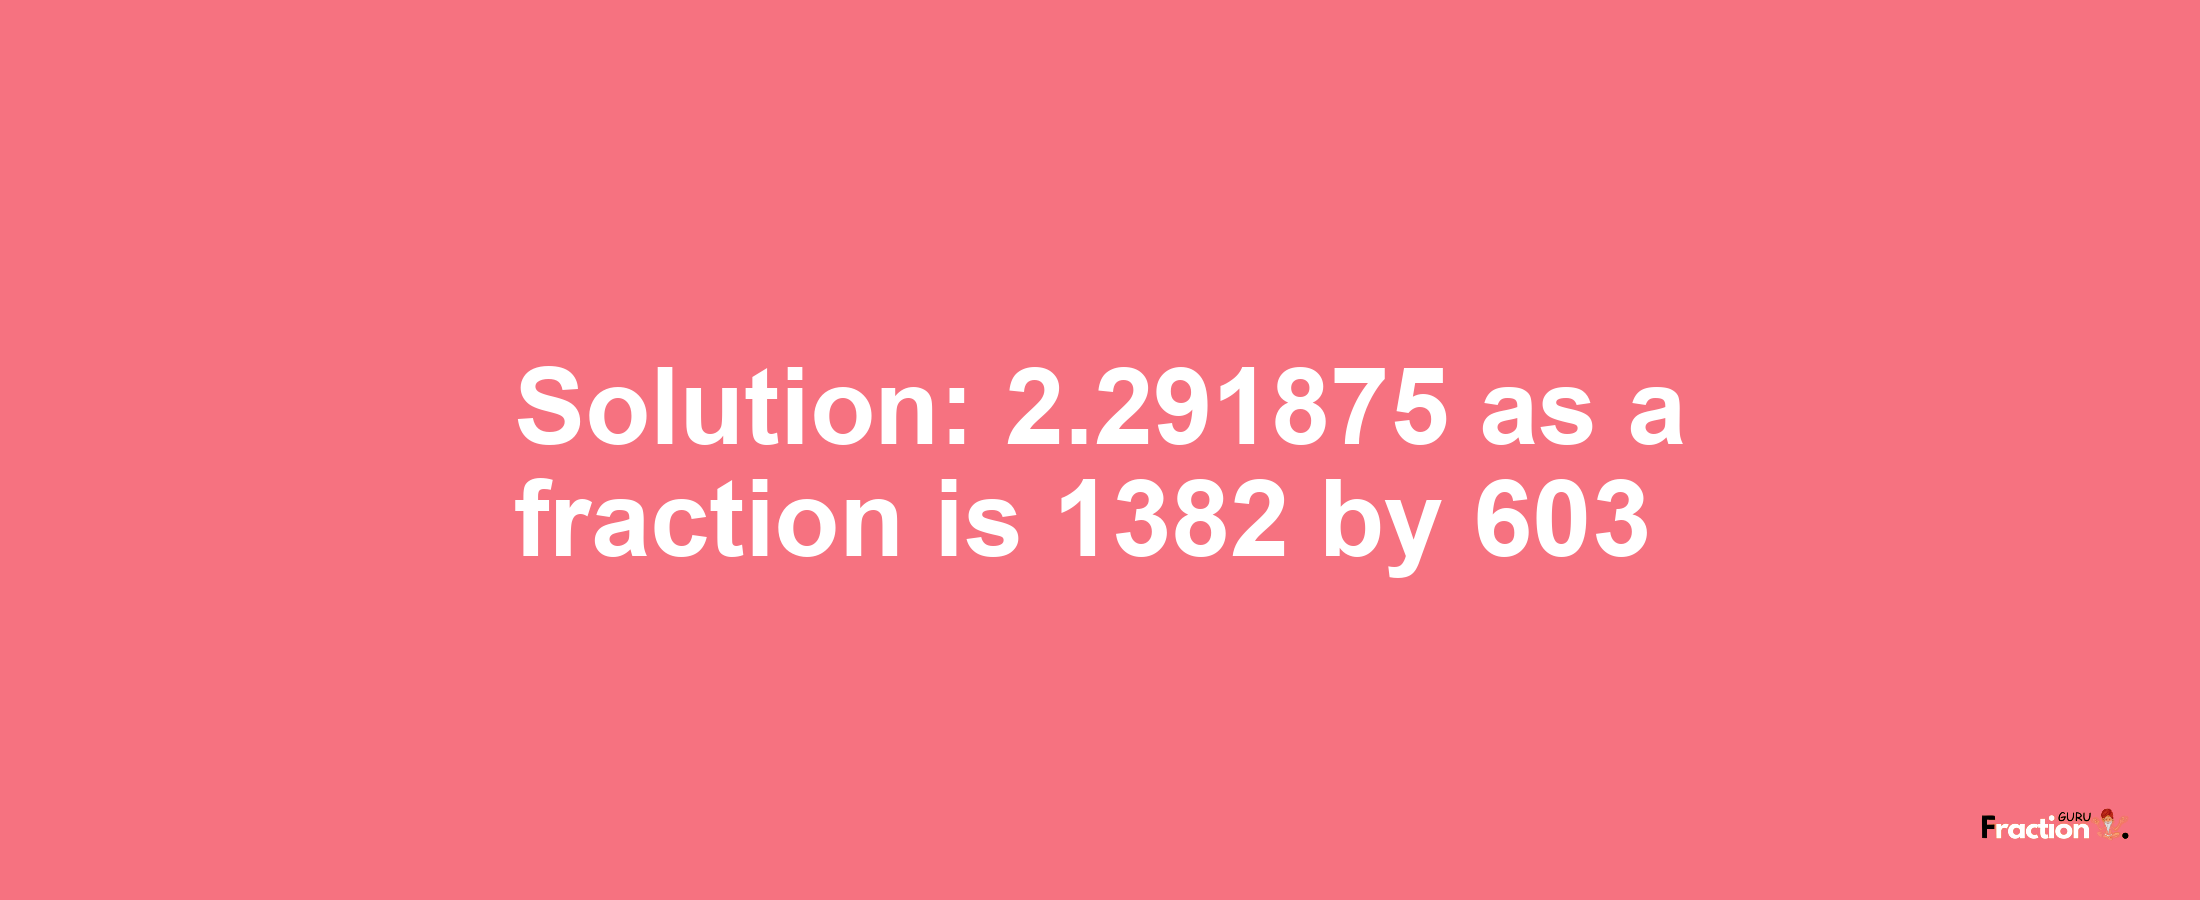 Solution:2.291875 as a fraction is 1382/603